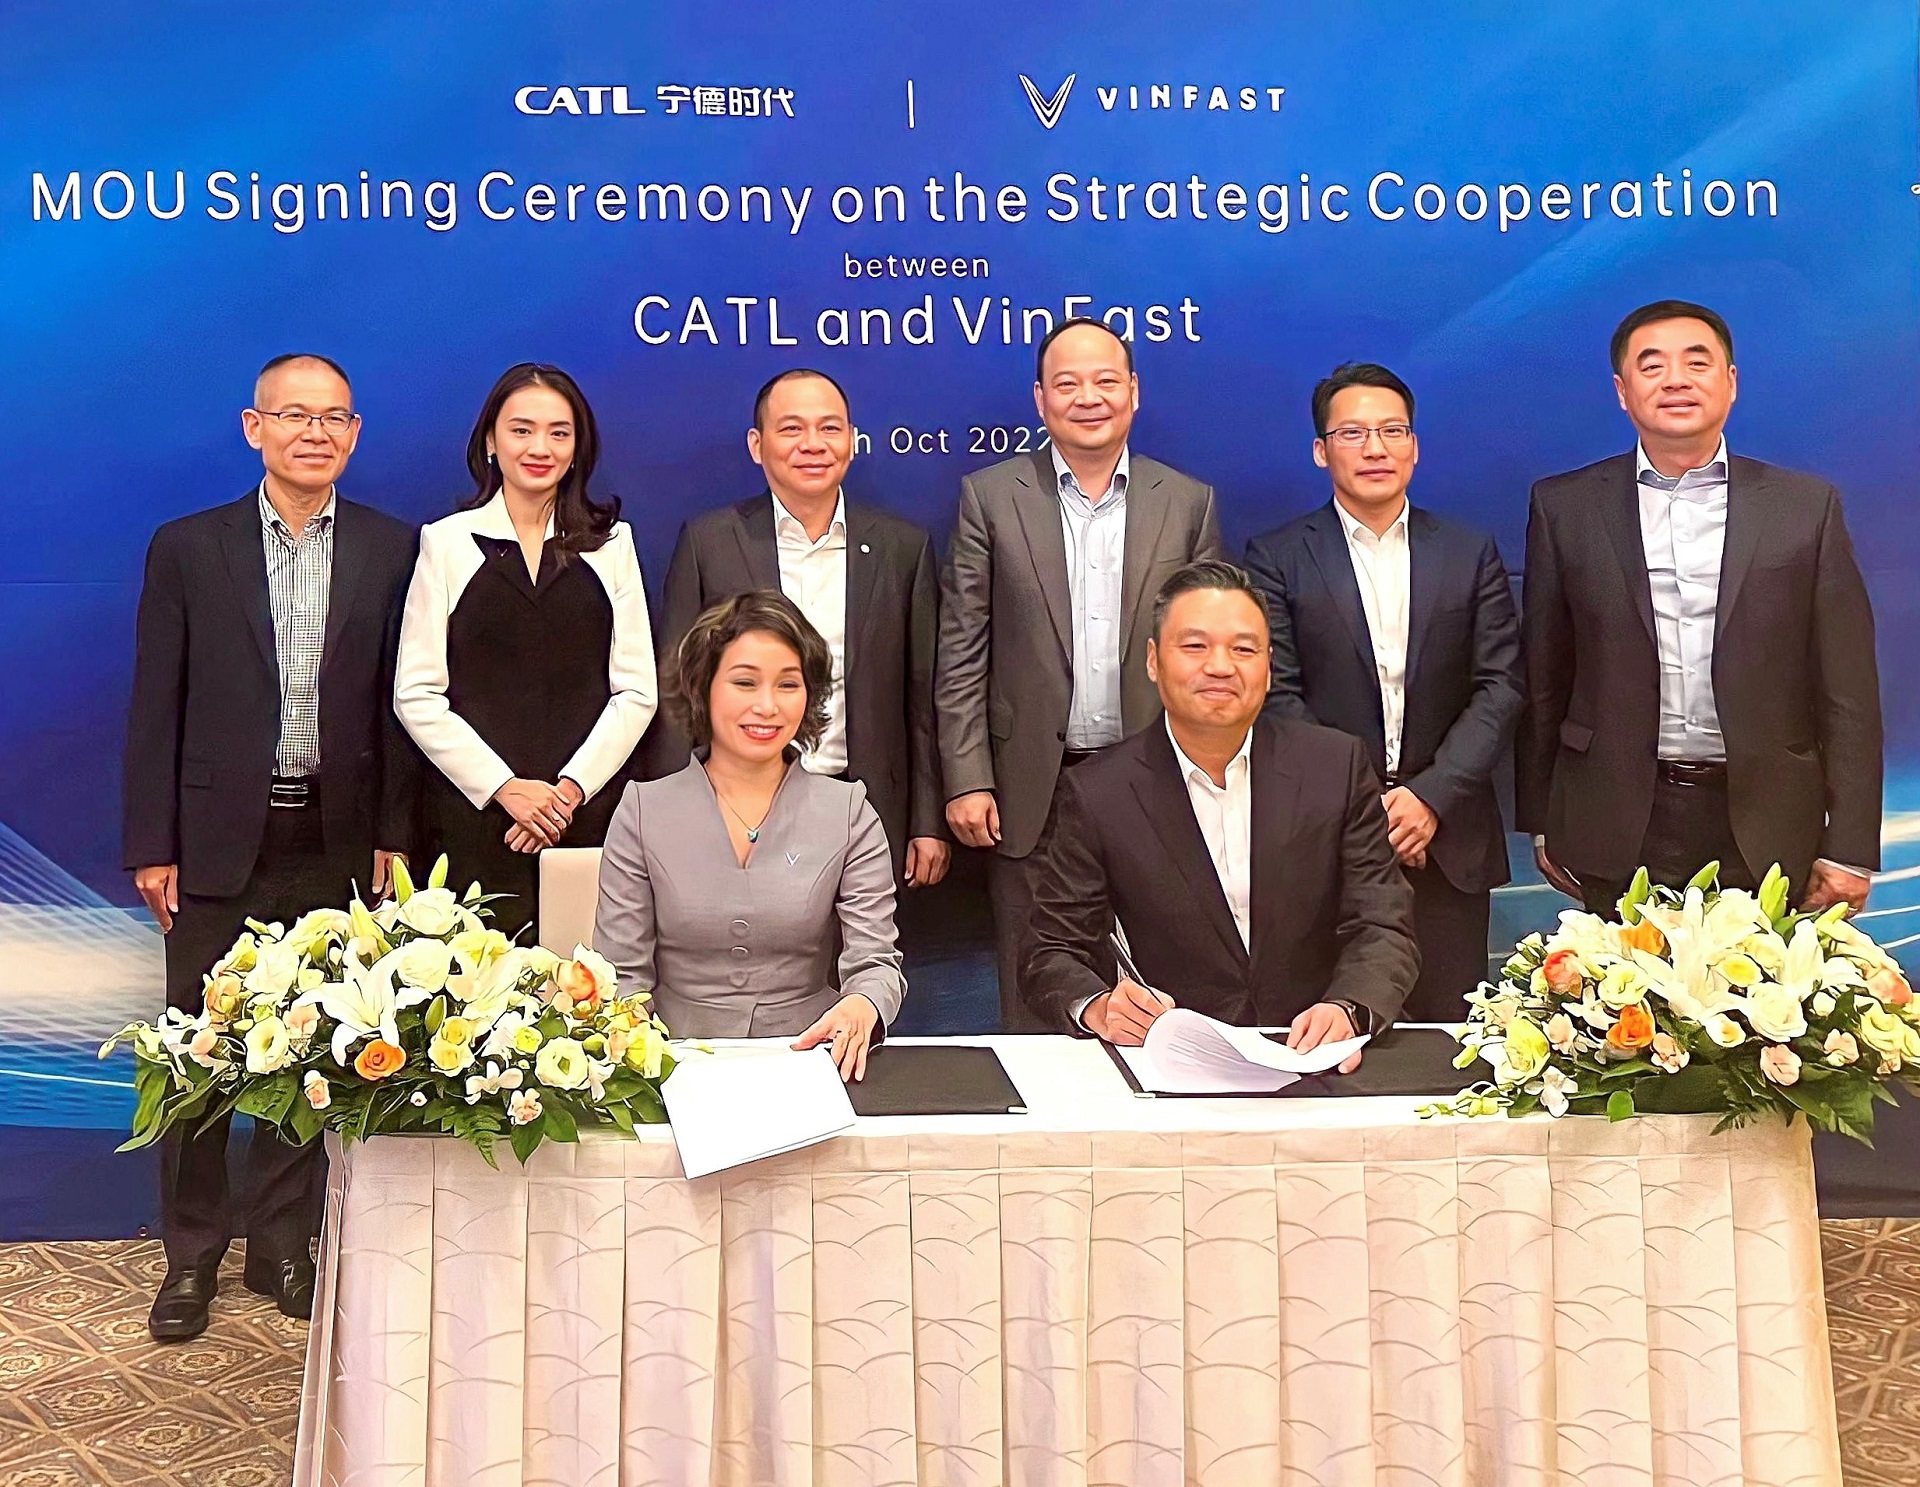 Mr. Pham Nhat Vuong - Chairman of Vingroup and Mr. Robin Zeng - Founder and Chairman of CATL (center) witnessed the signing of a memorandum of understanding on strategic cooperation between CATL and VinFast in Osaka, Japan on October 30, 2022